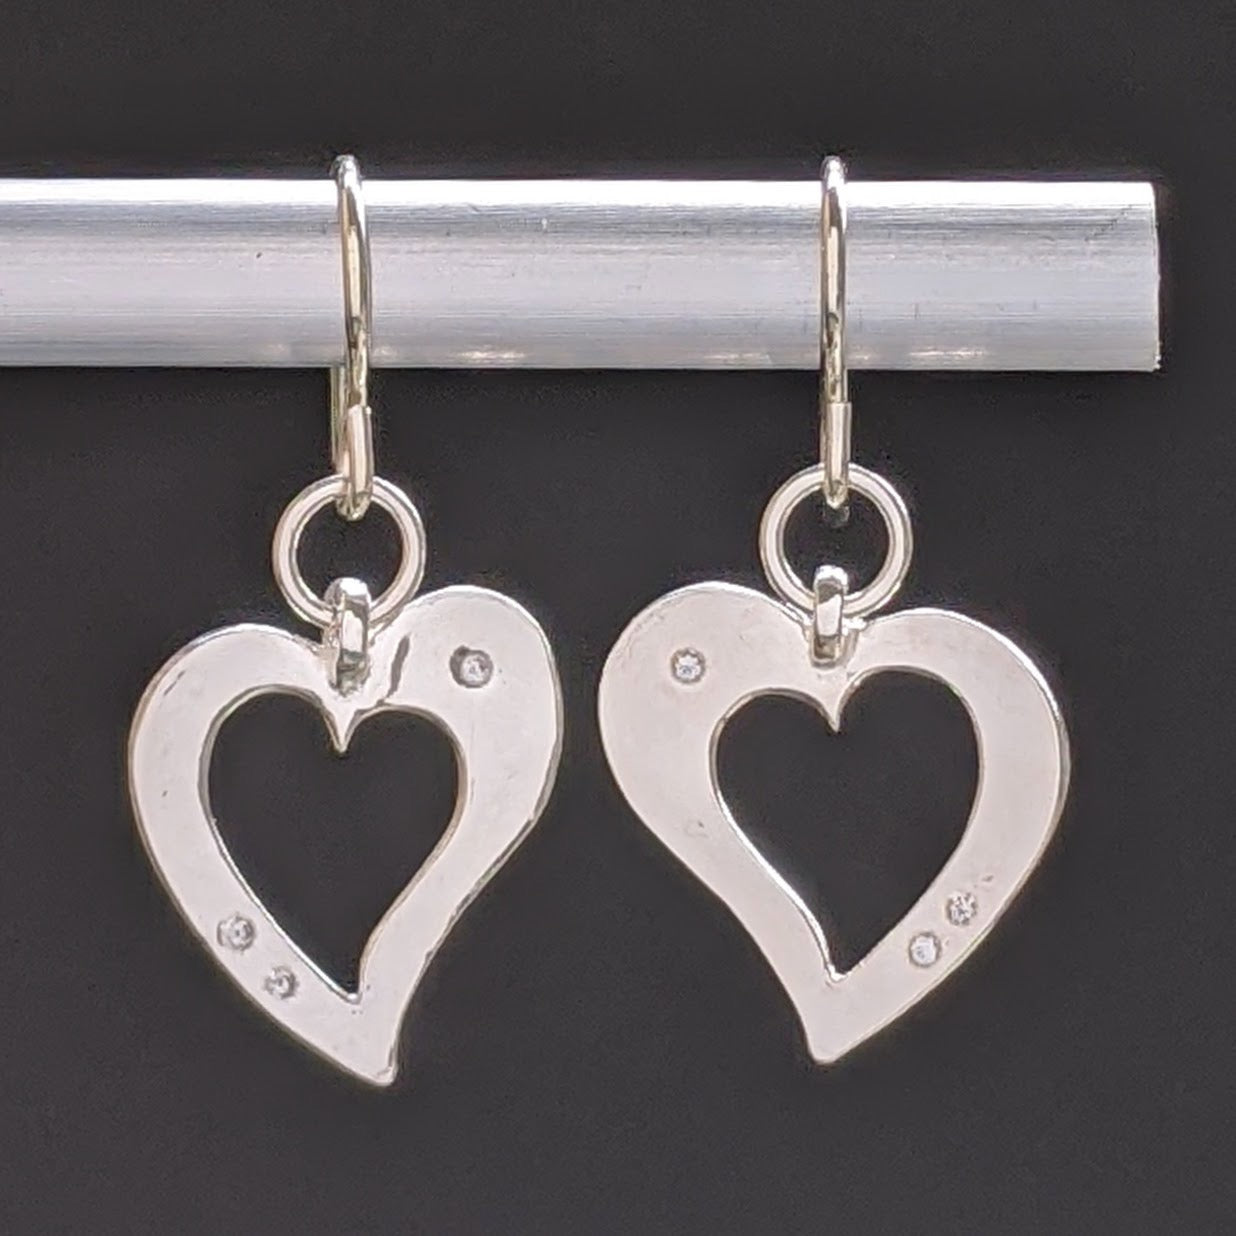 SIMPLE HEART CHAKRA EARRINGS | <Z-FIRE.COM> .925 Sterling Silver Kidney Wires 0.5 Inches Wide 1.5 cm Wide About 1 Inch Total Length 3 cm Total Length Free Astrological Report Free Standard Shipping Hassle Free Returns